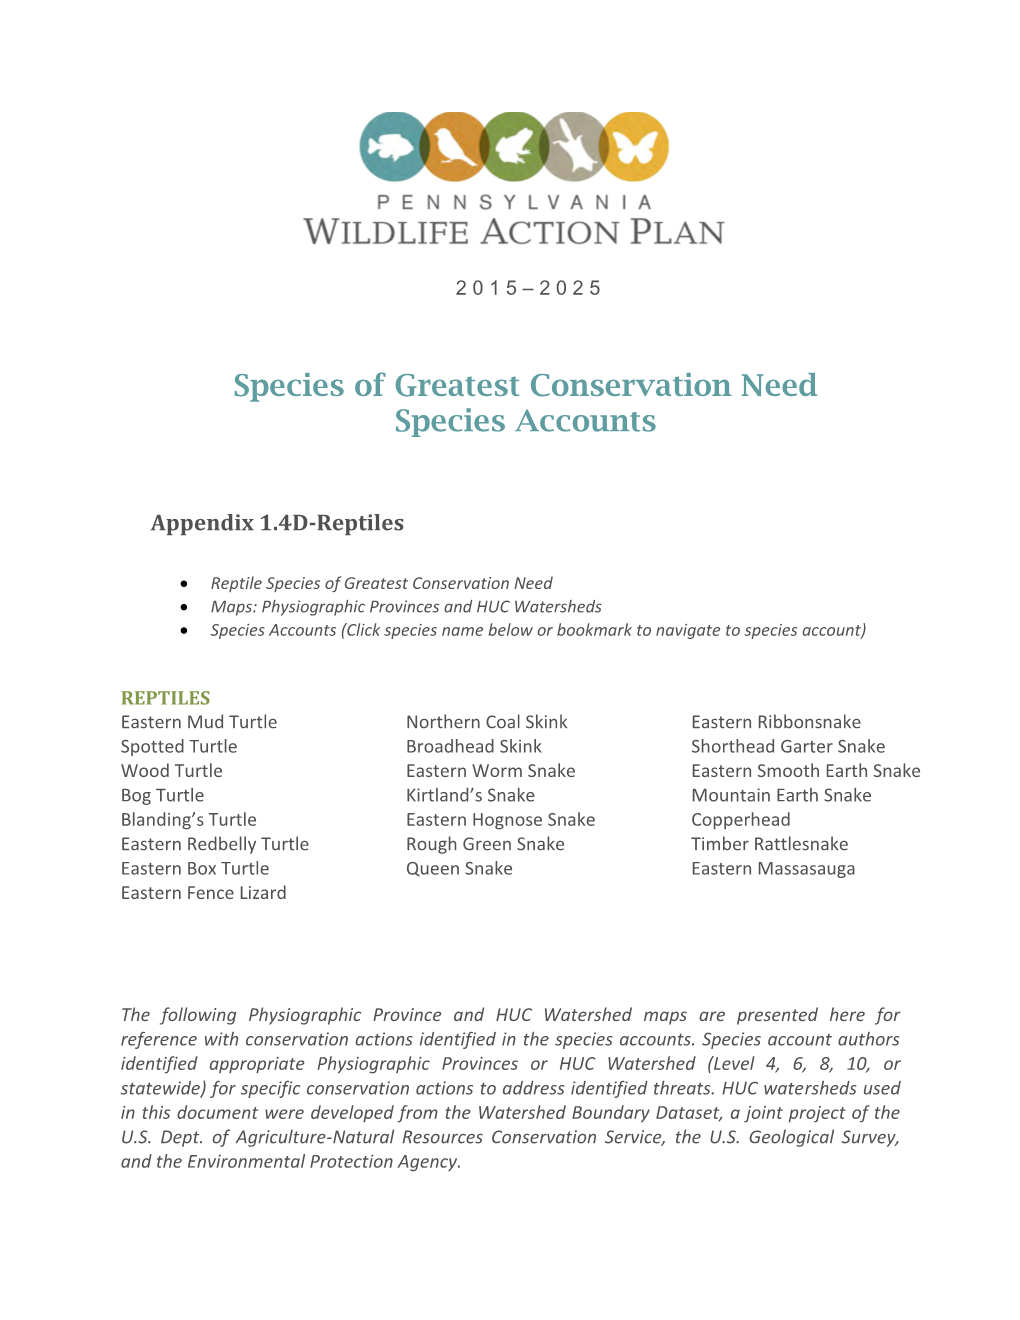 Species of Greatest Conservation Need Species Accounts